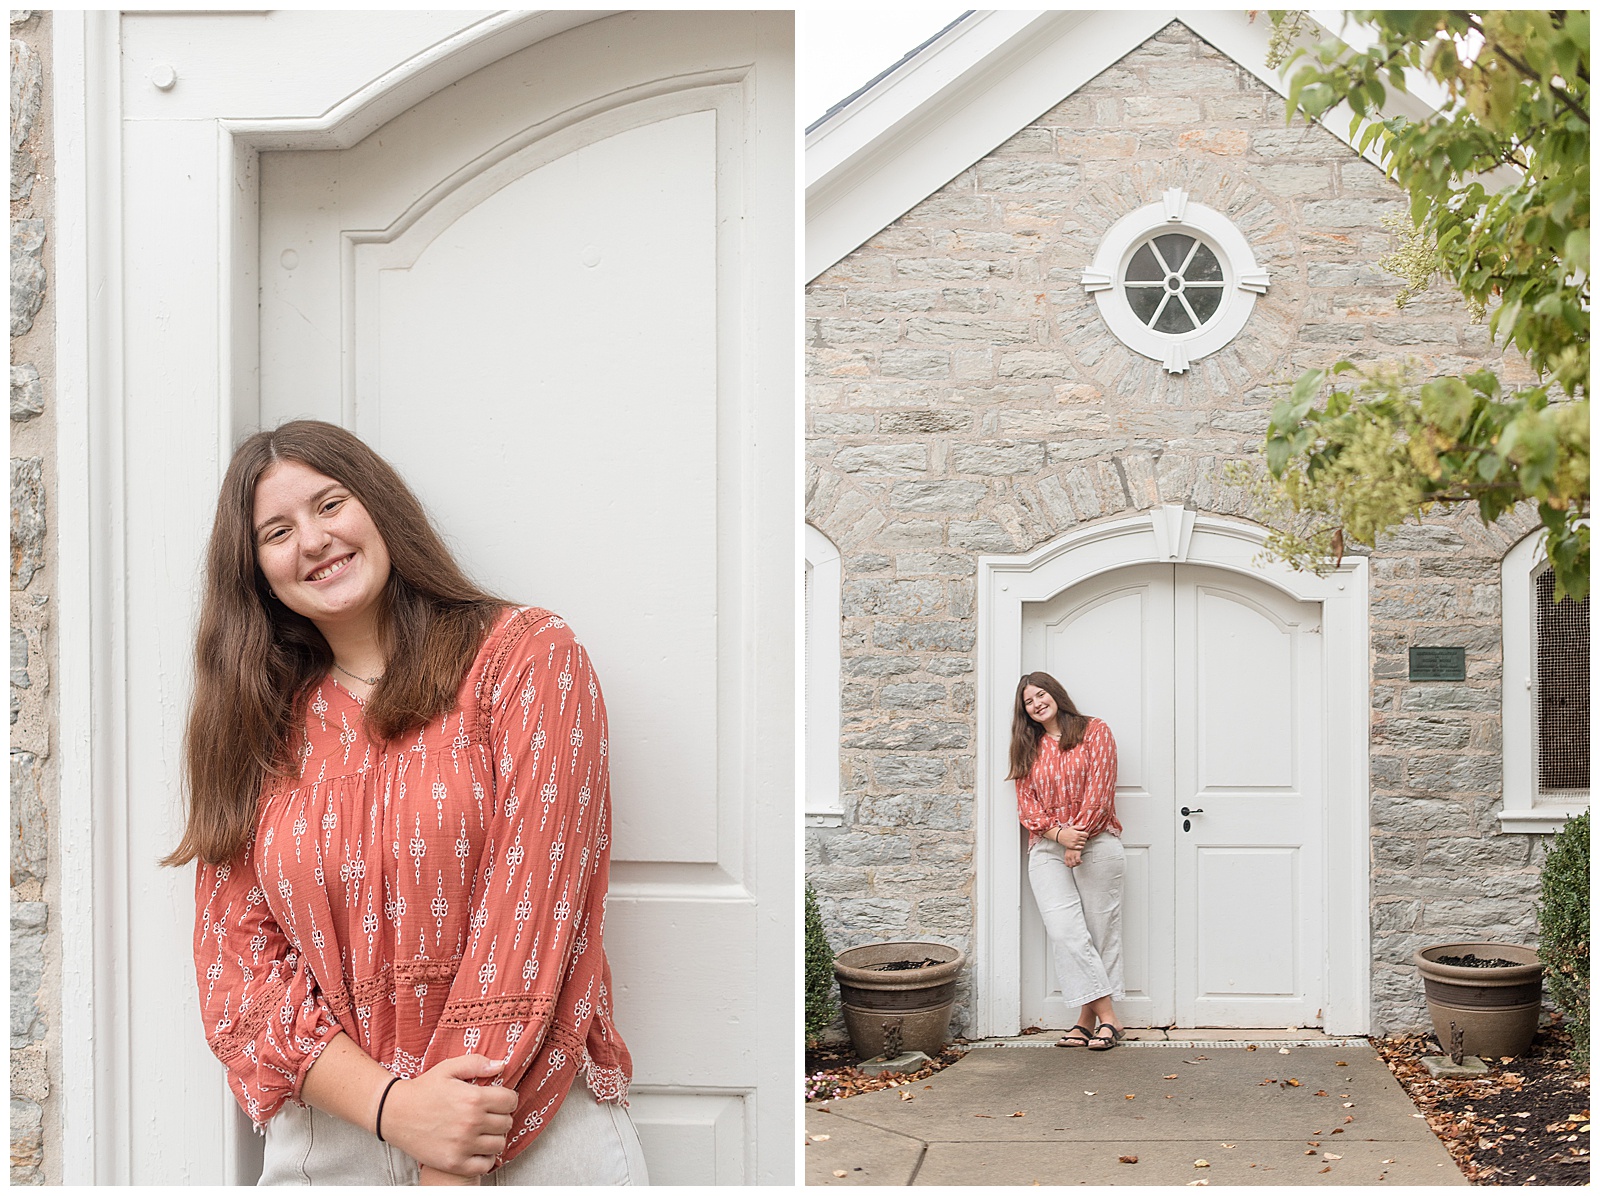 senior girl standing in small white double door frame of historic stone building on summer evening